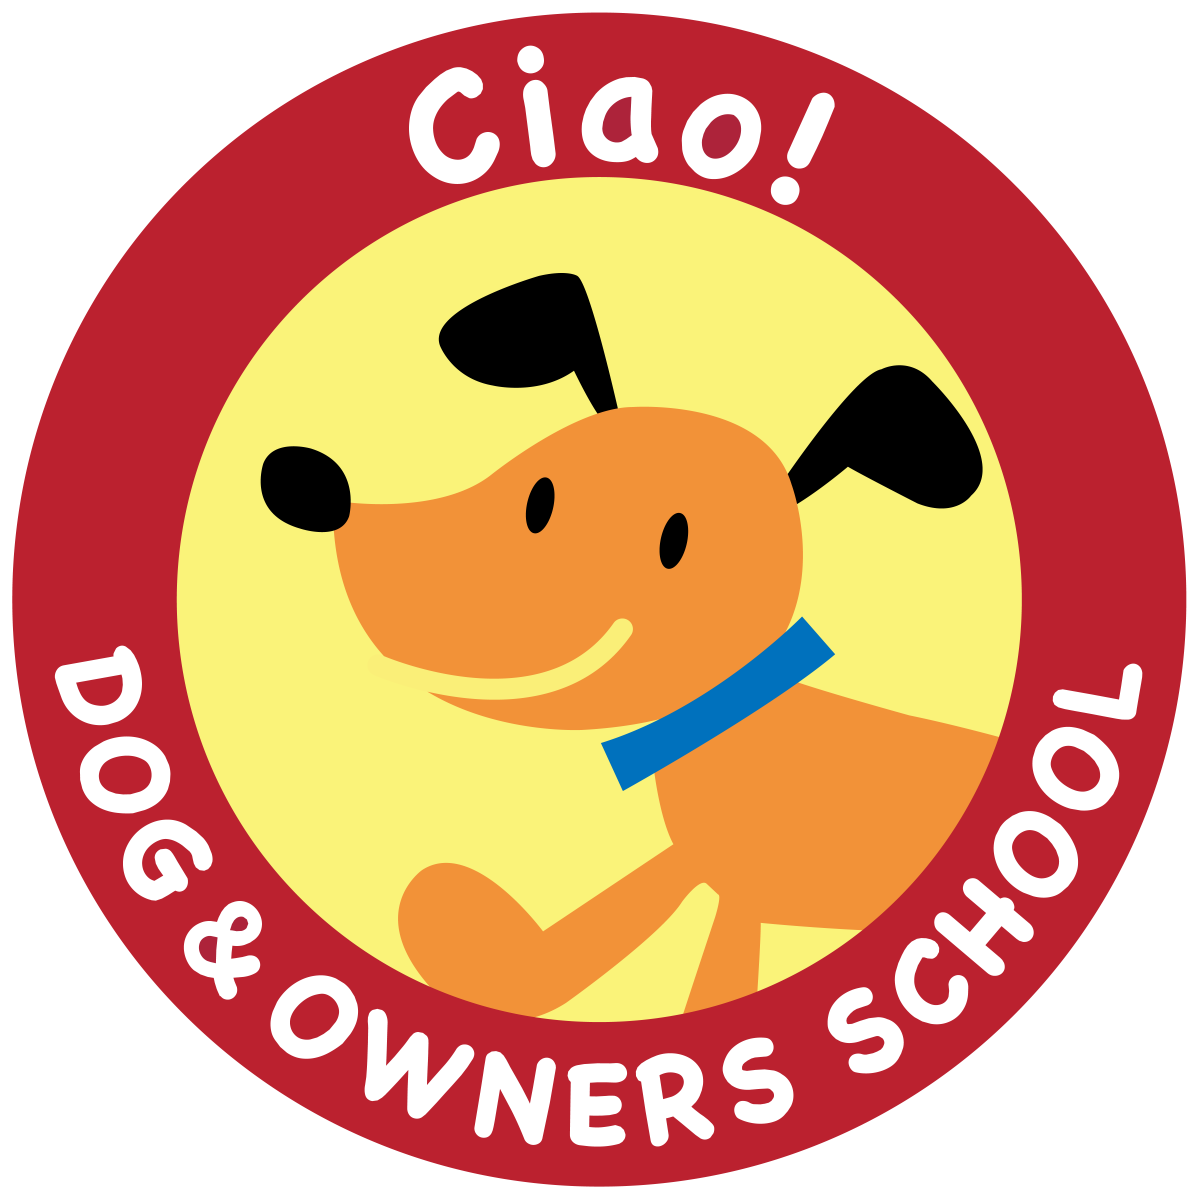 Ciao! Dog & Owners School Suginami